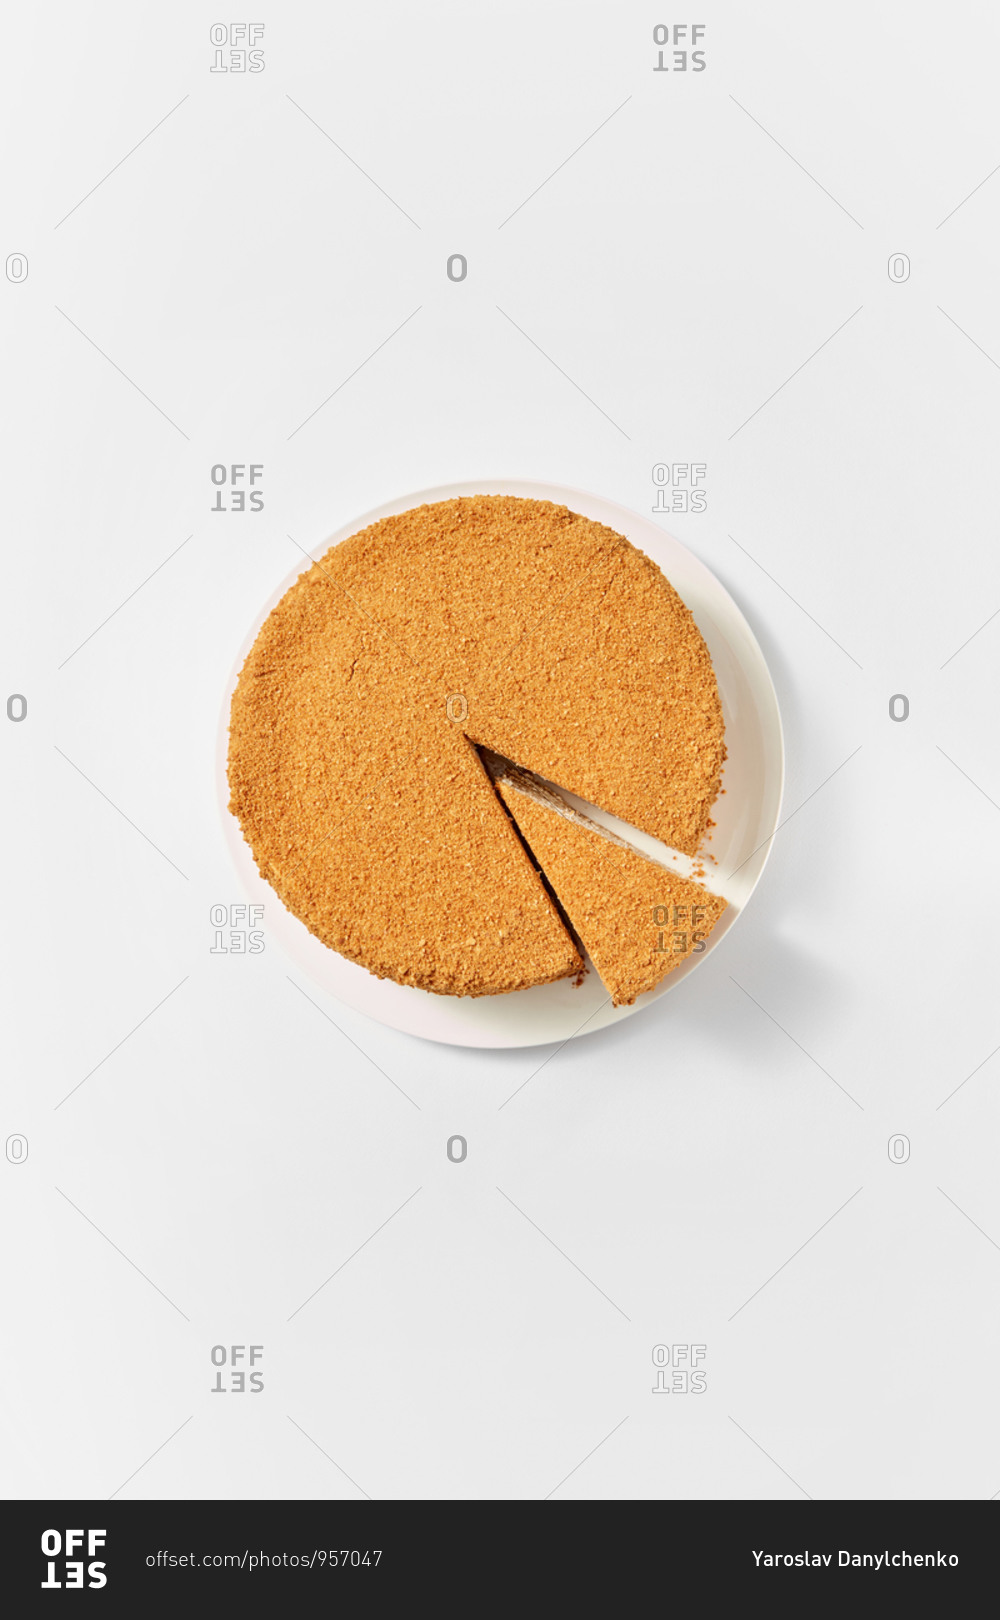 Top view of the whole homemade freshly baked honey cake with cut piece of delicious sweet dessert on a ceramic plate on white background, copy space.